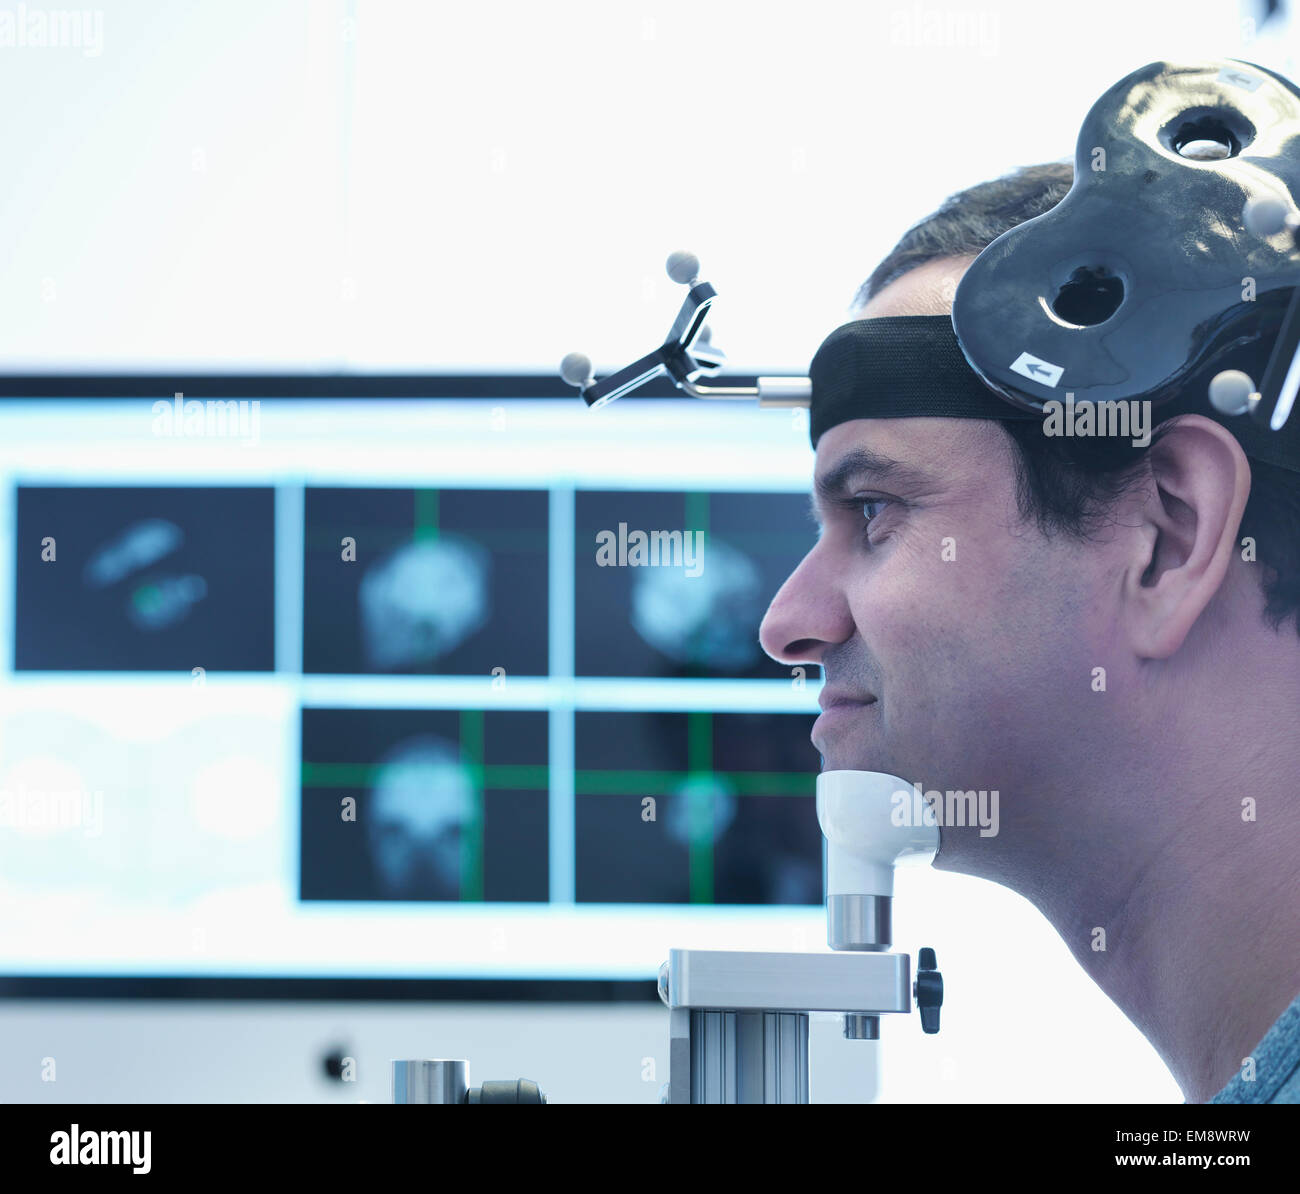 Patient in transcranial magnetic stimulation (TMS) experiment, close up Stock Photo